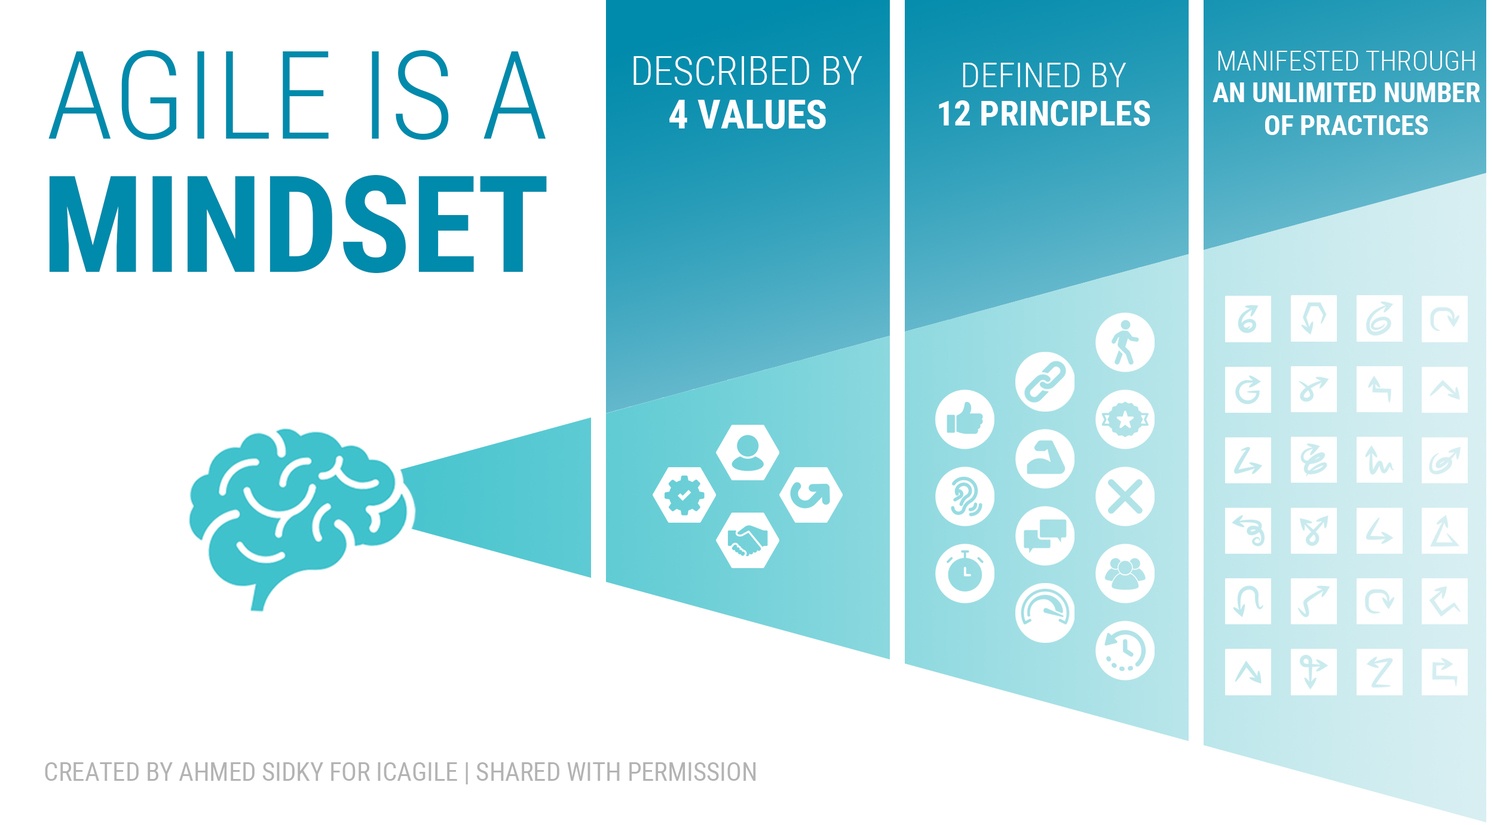 Visualization of the hierarchy that Agile is a mindset, described by 4 values, defined by 12 principles, and manifested through an unlimited number of practices.